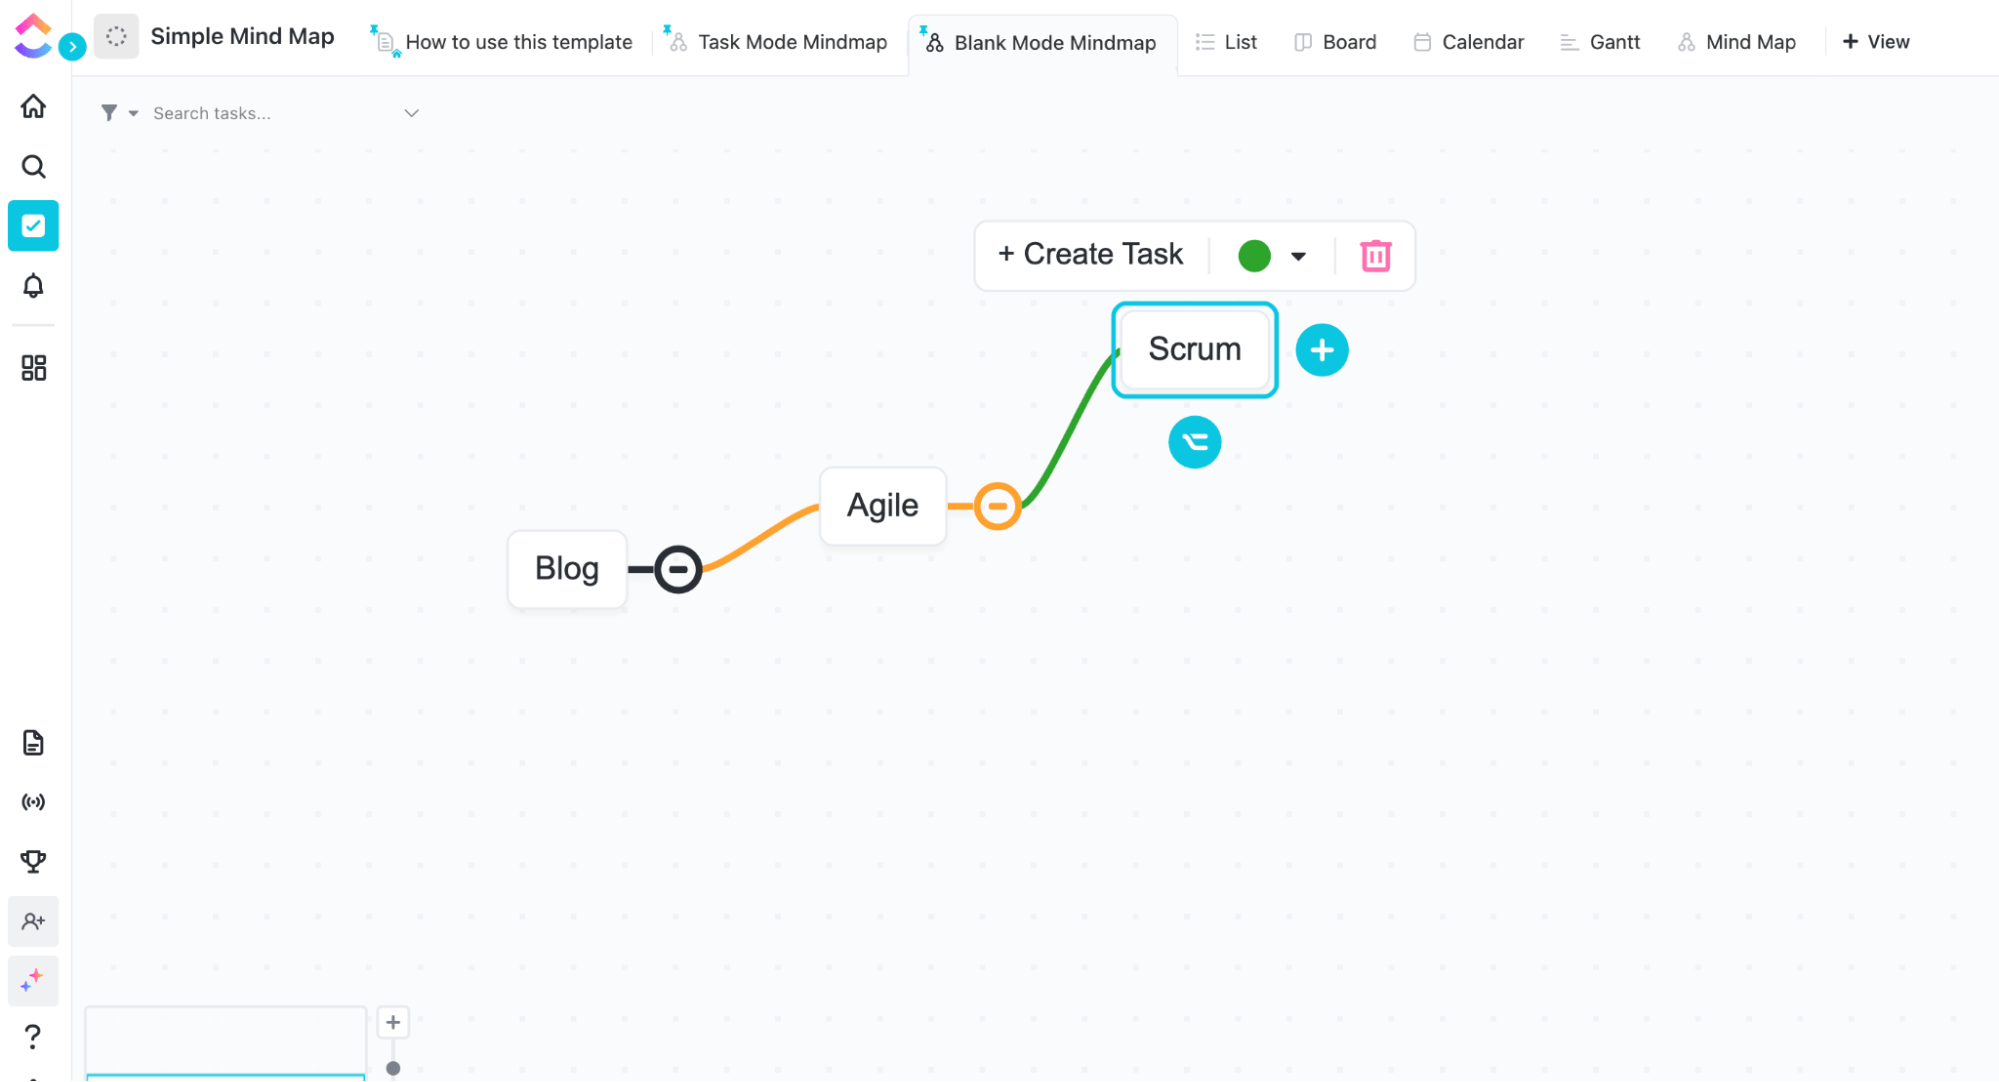 Visualize your workflow in a flexible diagram with the Simple Mind Map template by ClickUp